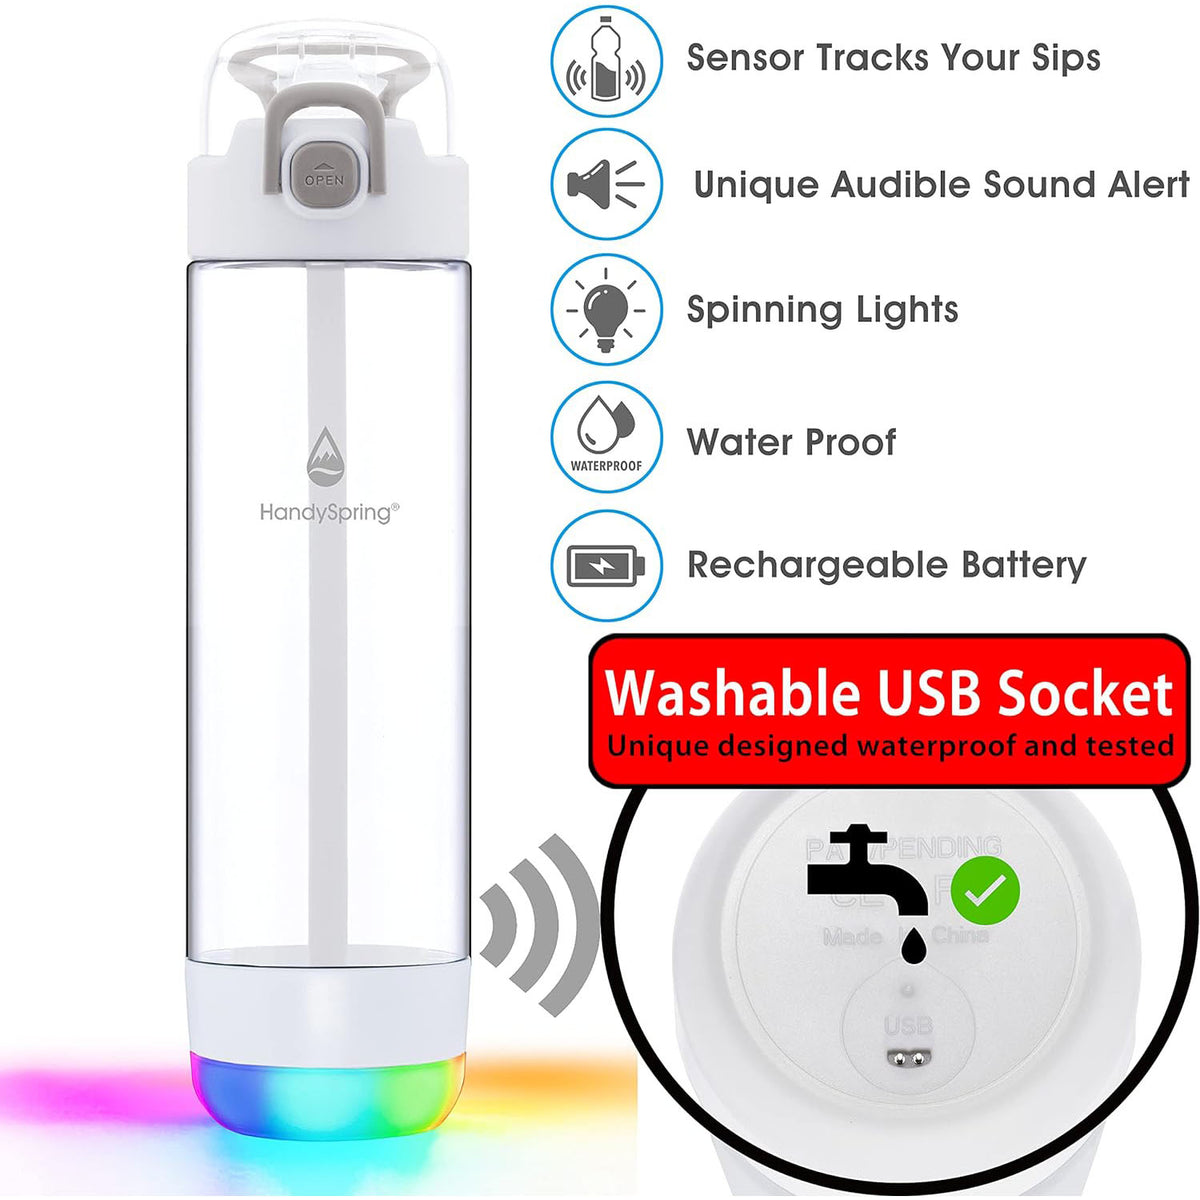 HANDYSPRING - 26 oz Smart Water Bottle with Reminder to Drink Water - Rechargeable - Switchable Lights and Sounds, Water Tracker with Straw, Track Your Sips